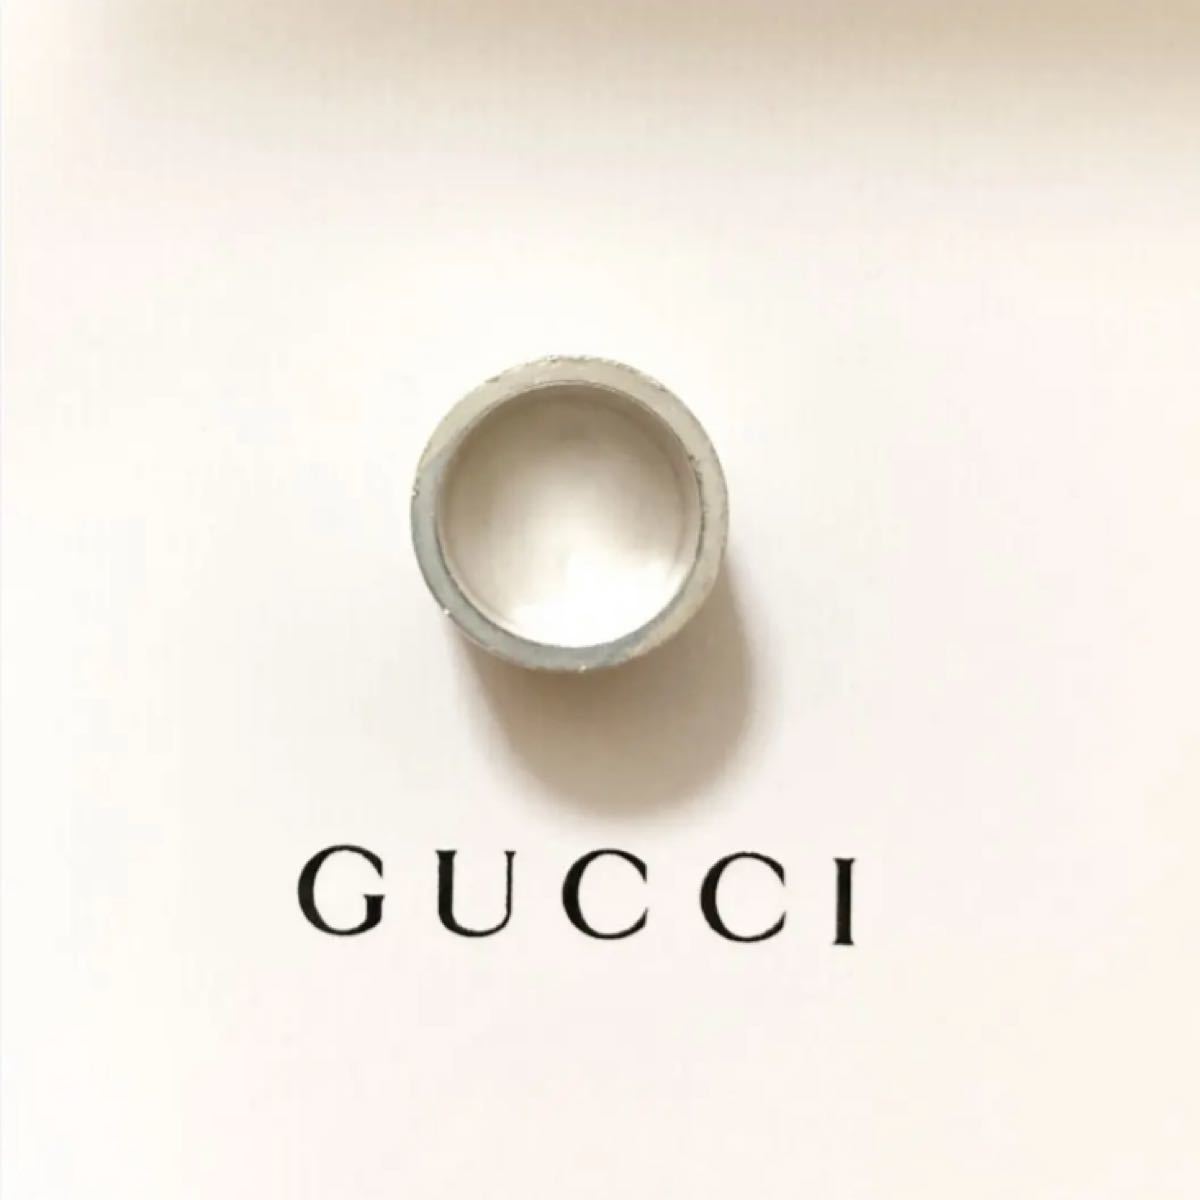 GUCCI made in italy シルバー ロゴ リング